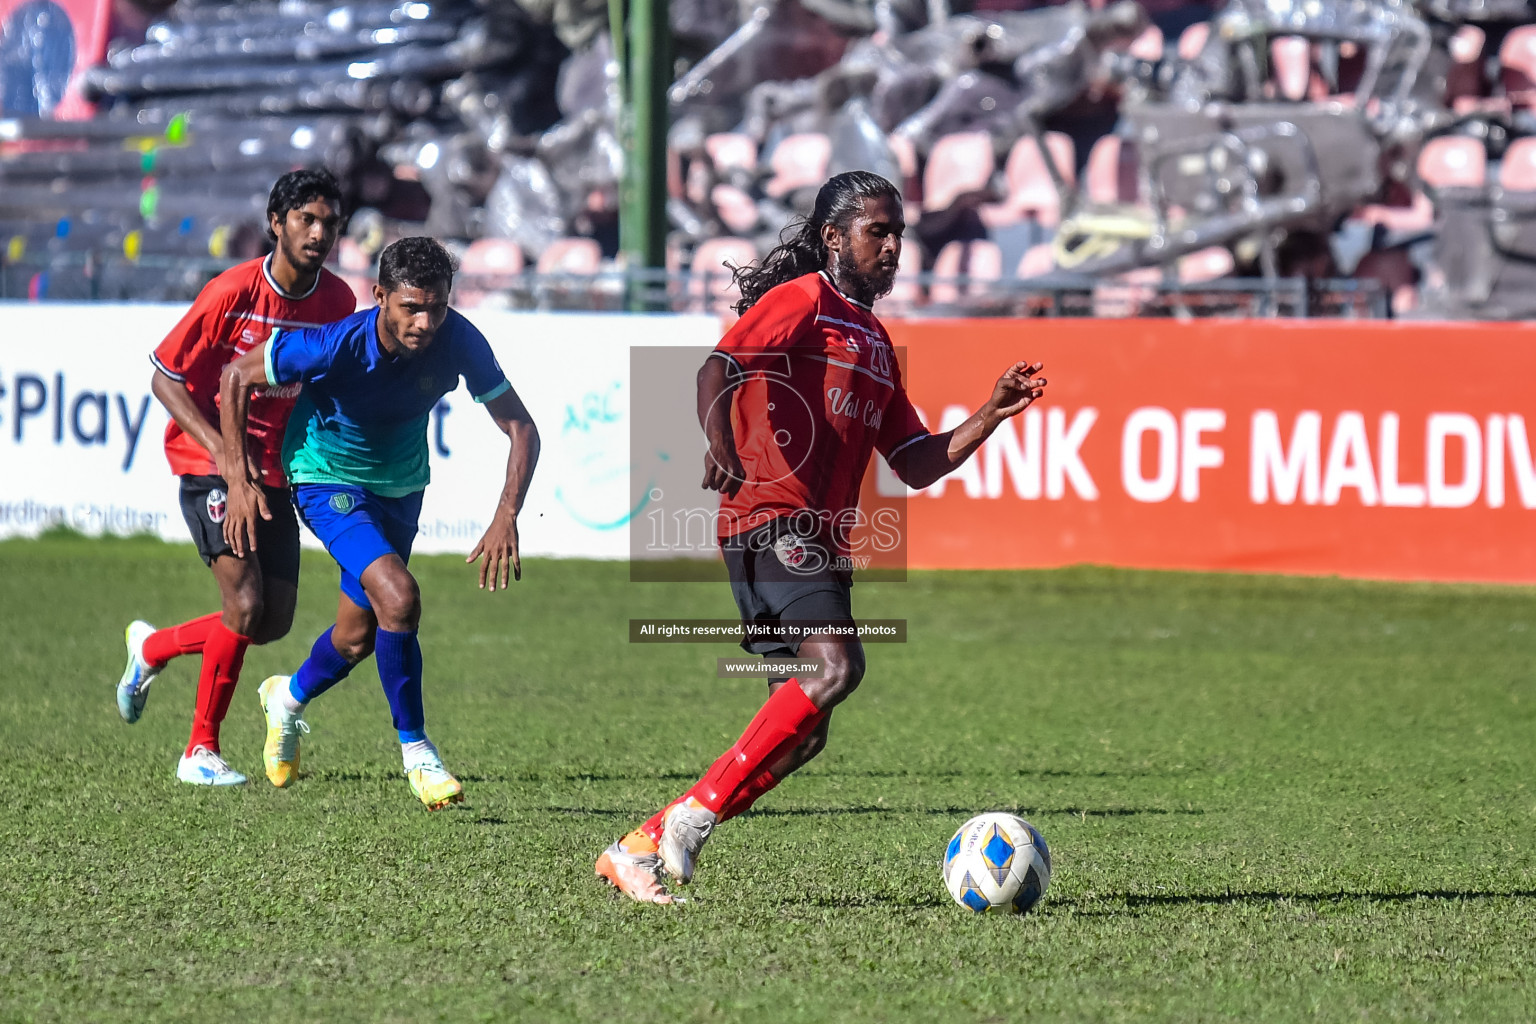 Super united sports vs Biss buru sports in the FA Cup 2022 on 12th Aug 2022, held in National Football Stadium, Male', Maldives Photos: Nausham Waheed / Images.mv